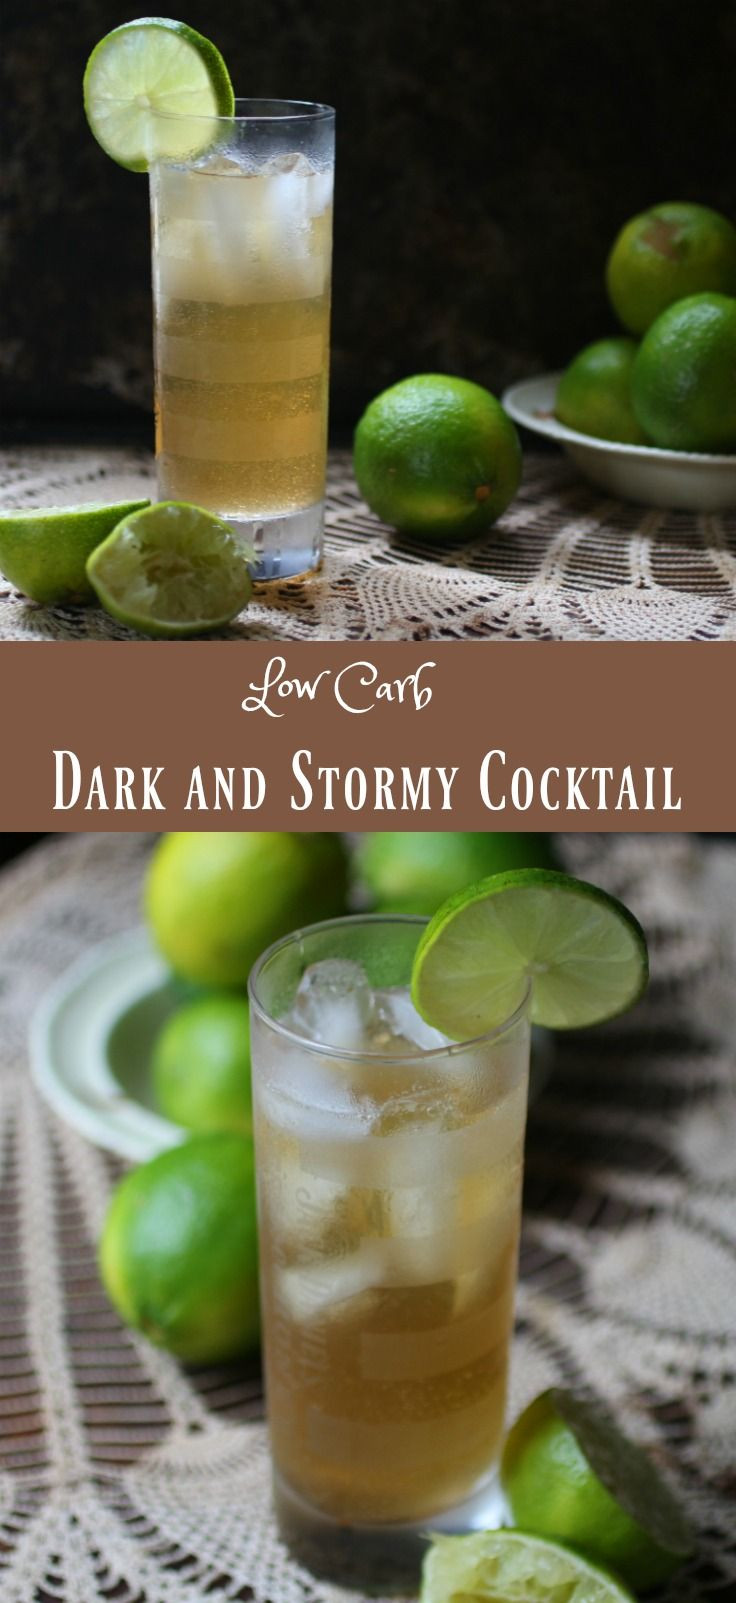 Low Carb Rum Drinks
 Dark and Stormy Cocktail Low Carb Twist on a Classic